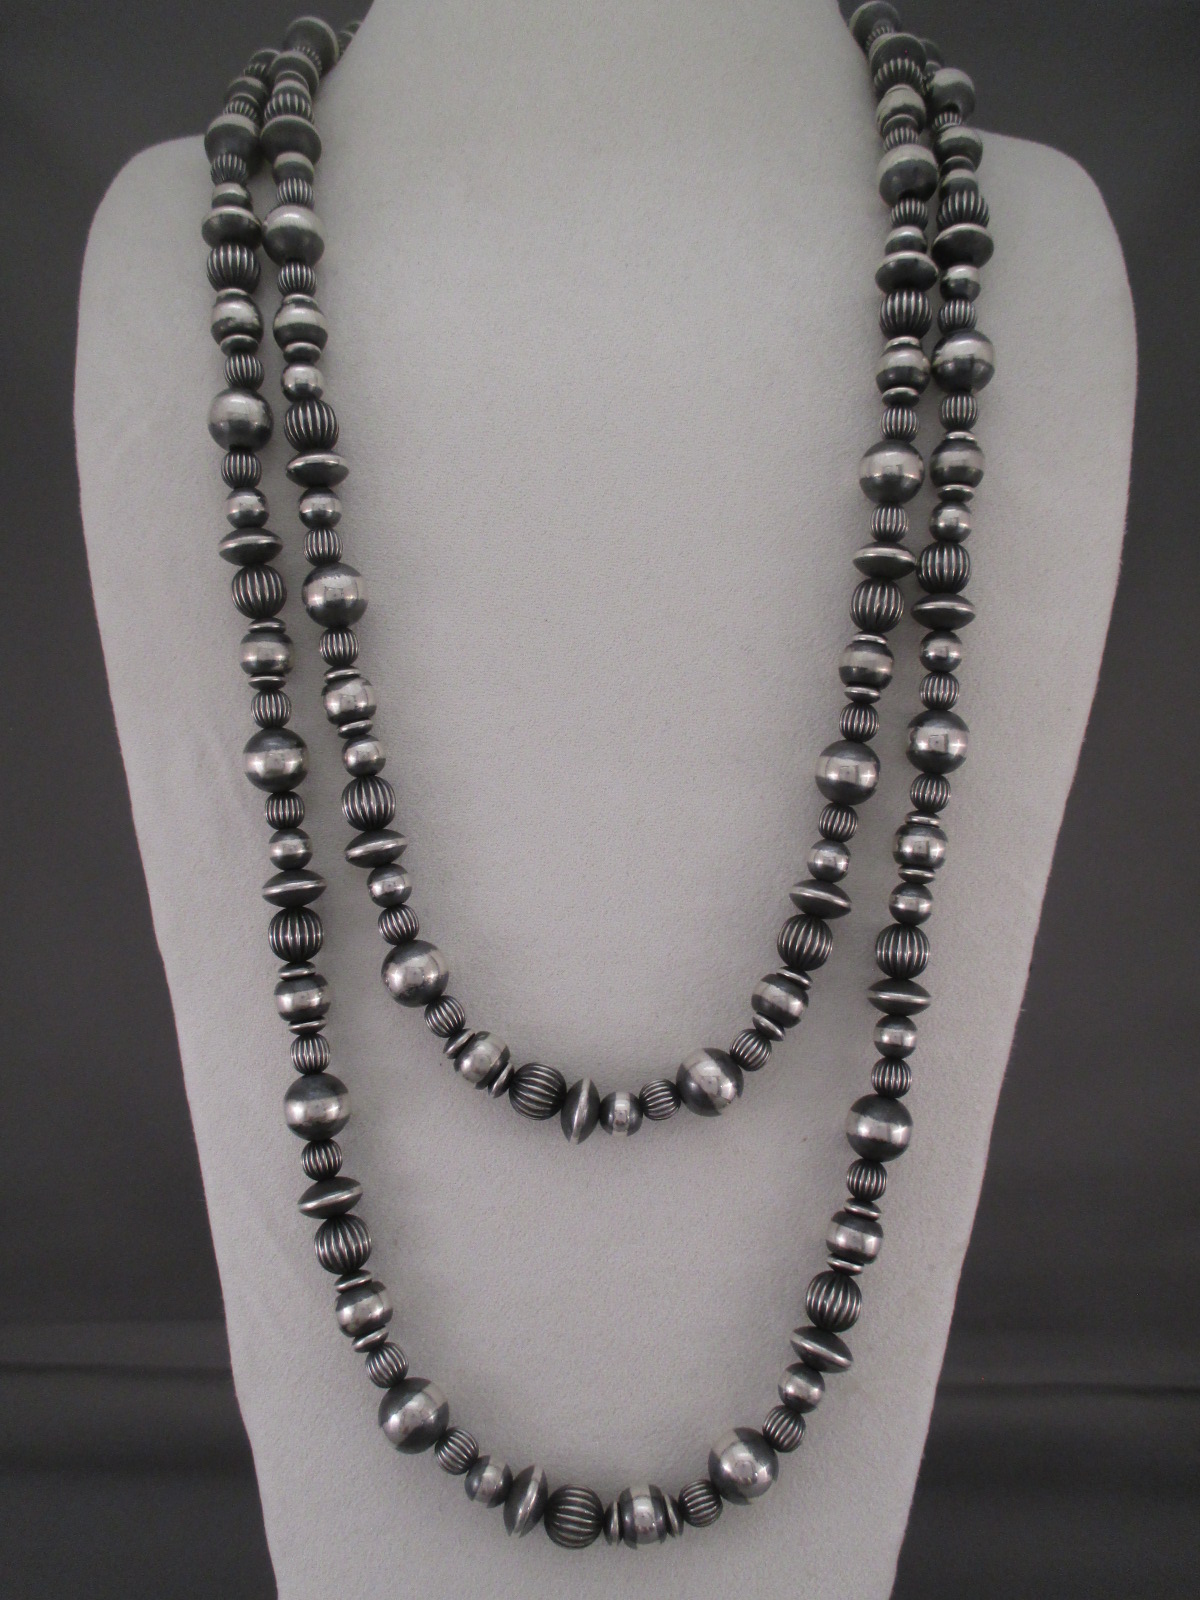 Oxidized Sterling Silver Necklace with Multi-Shaped Beads (60″)